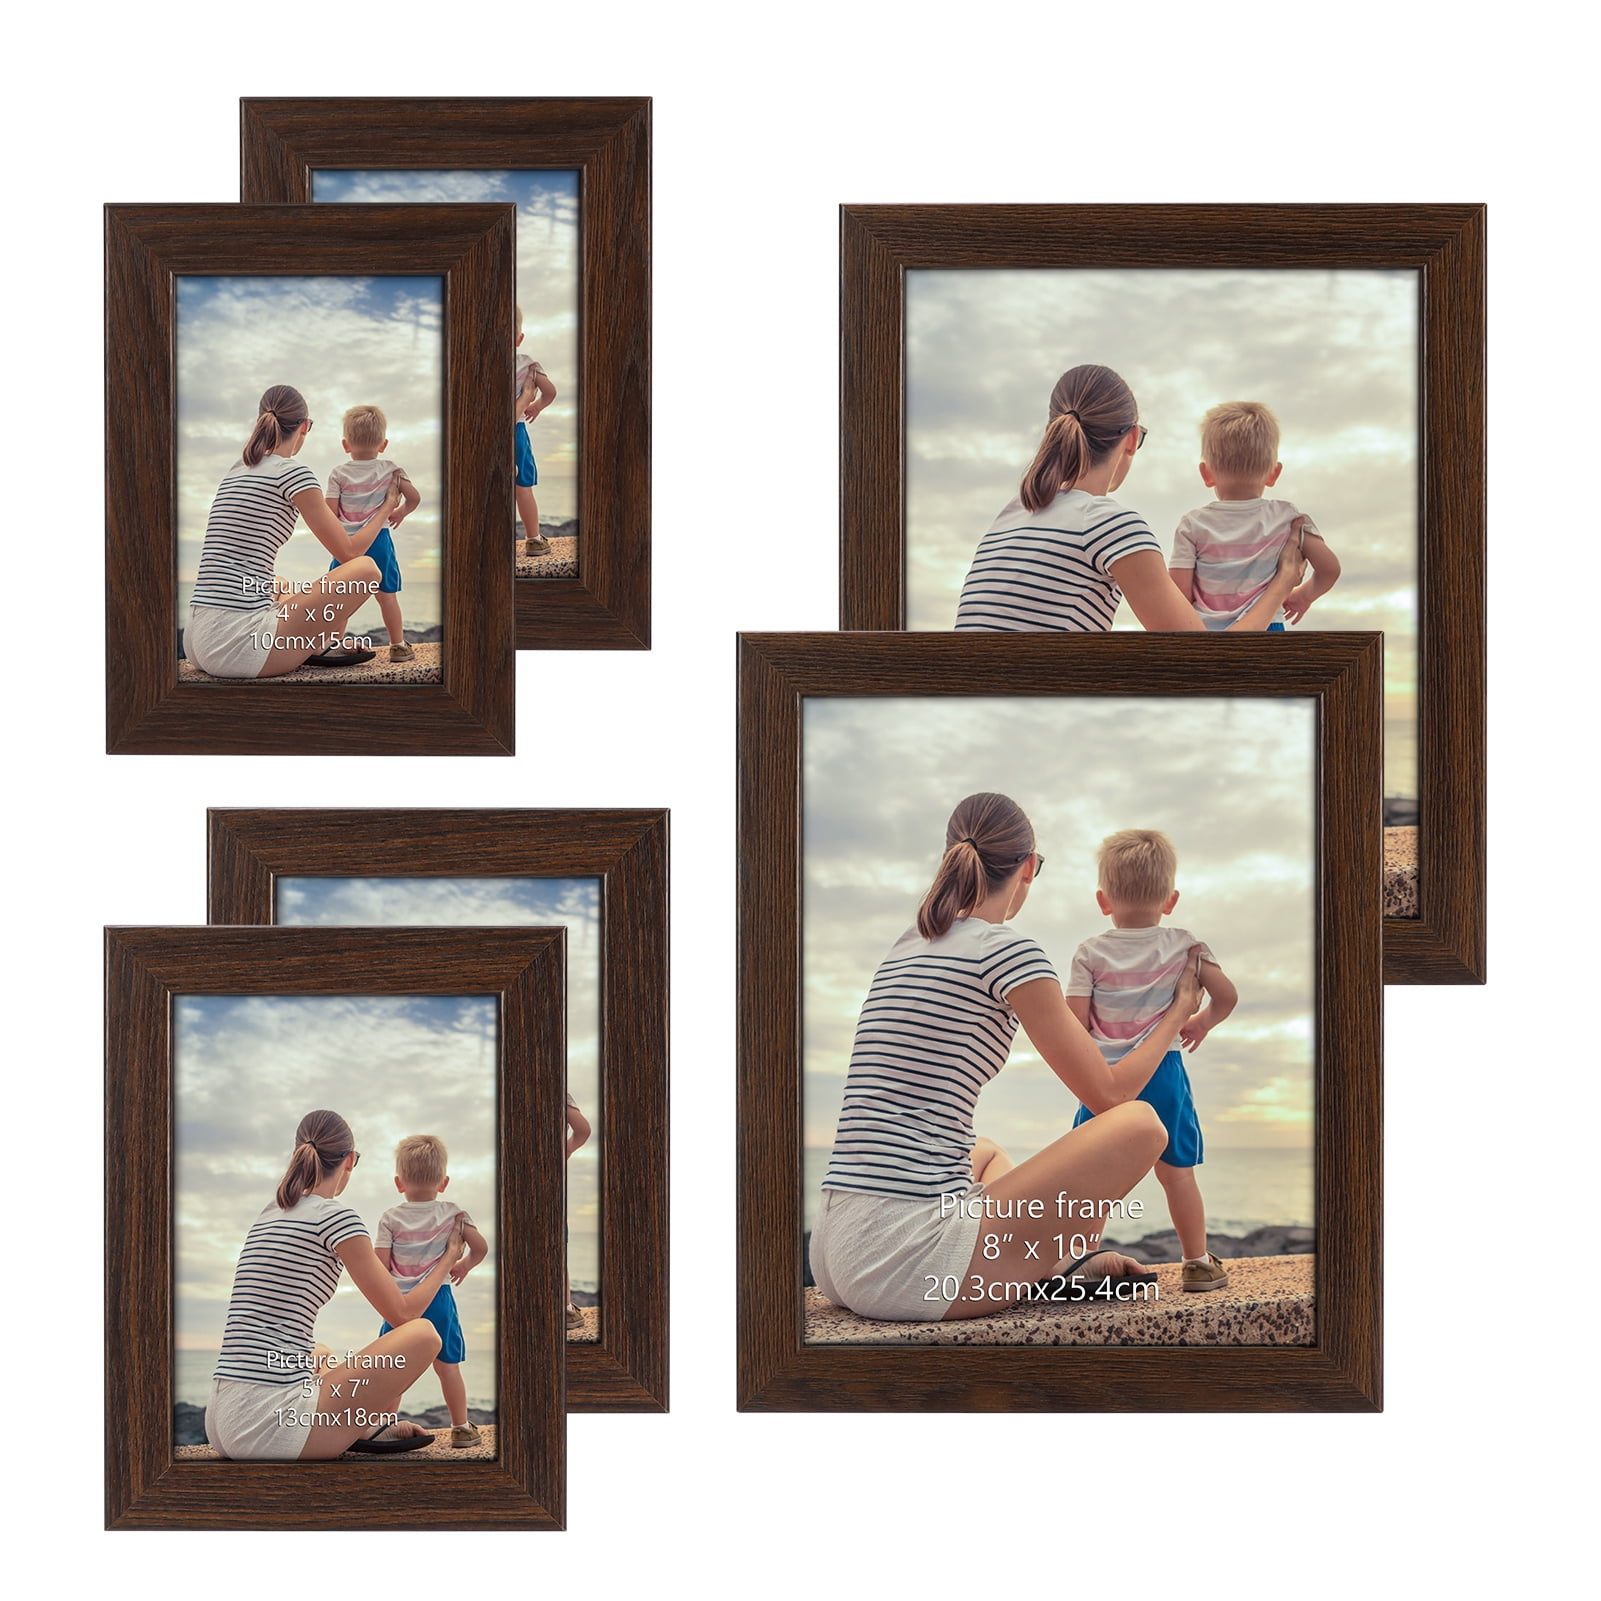 Triple Wood Friends Frame - Holds One 5x7 and Two 4x6 Photos